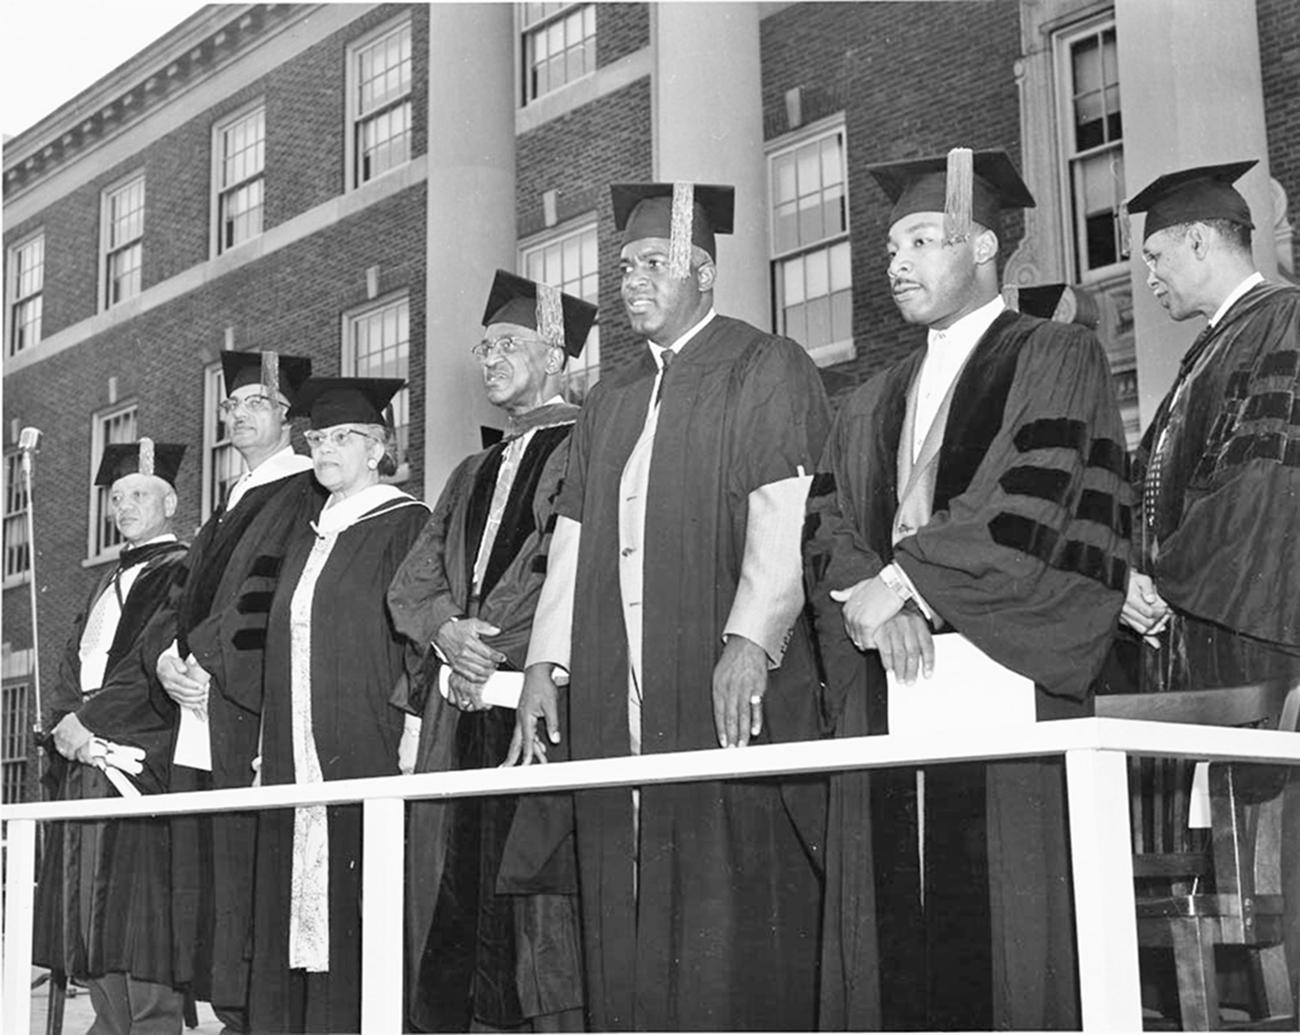 Dr. Martin Luther King Jr. at Howard University's 1957 commencement exercises